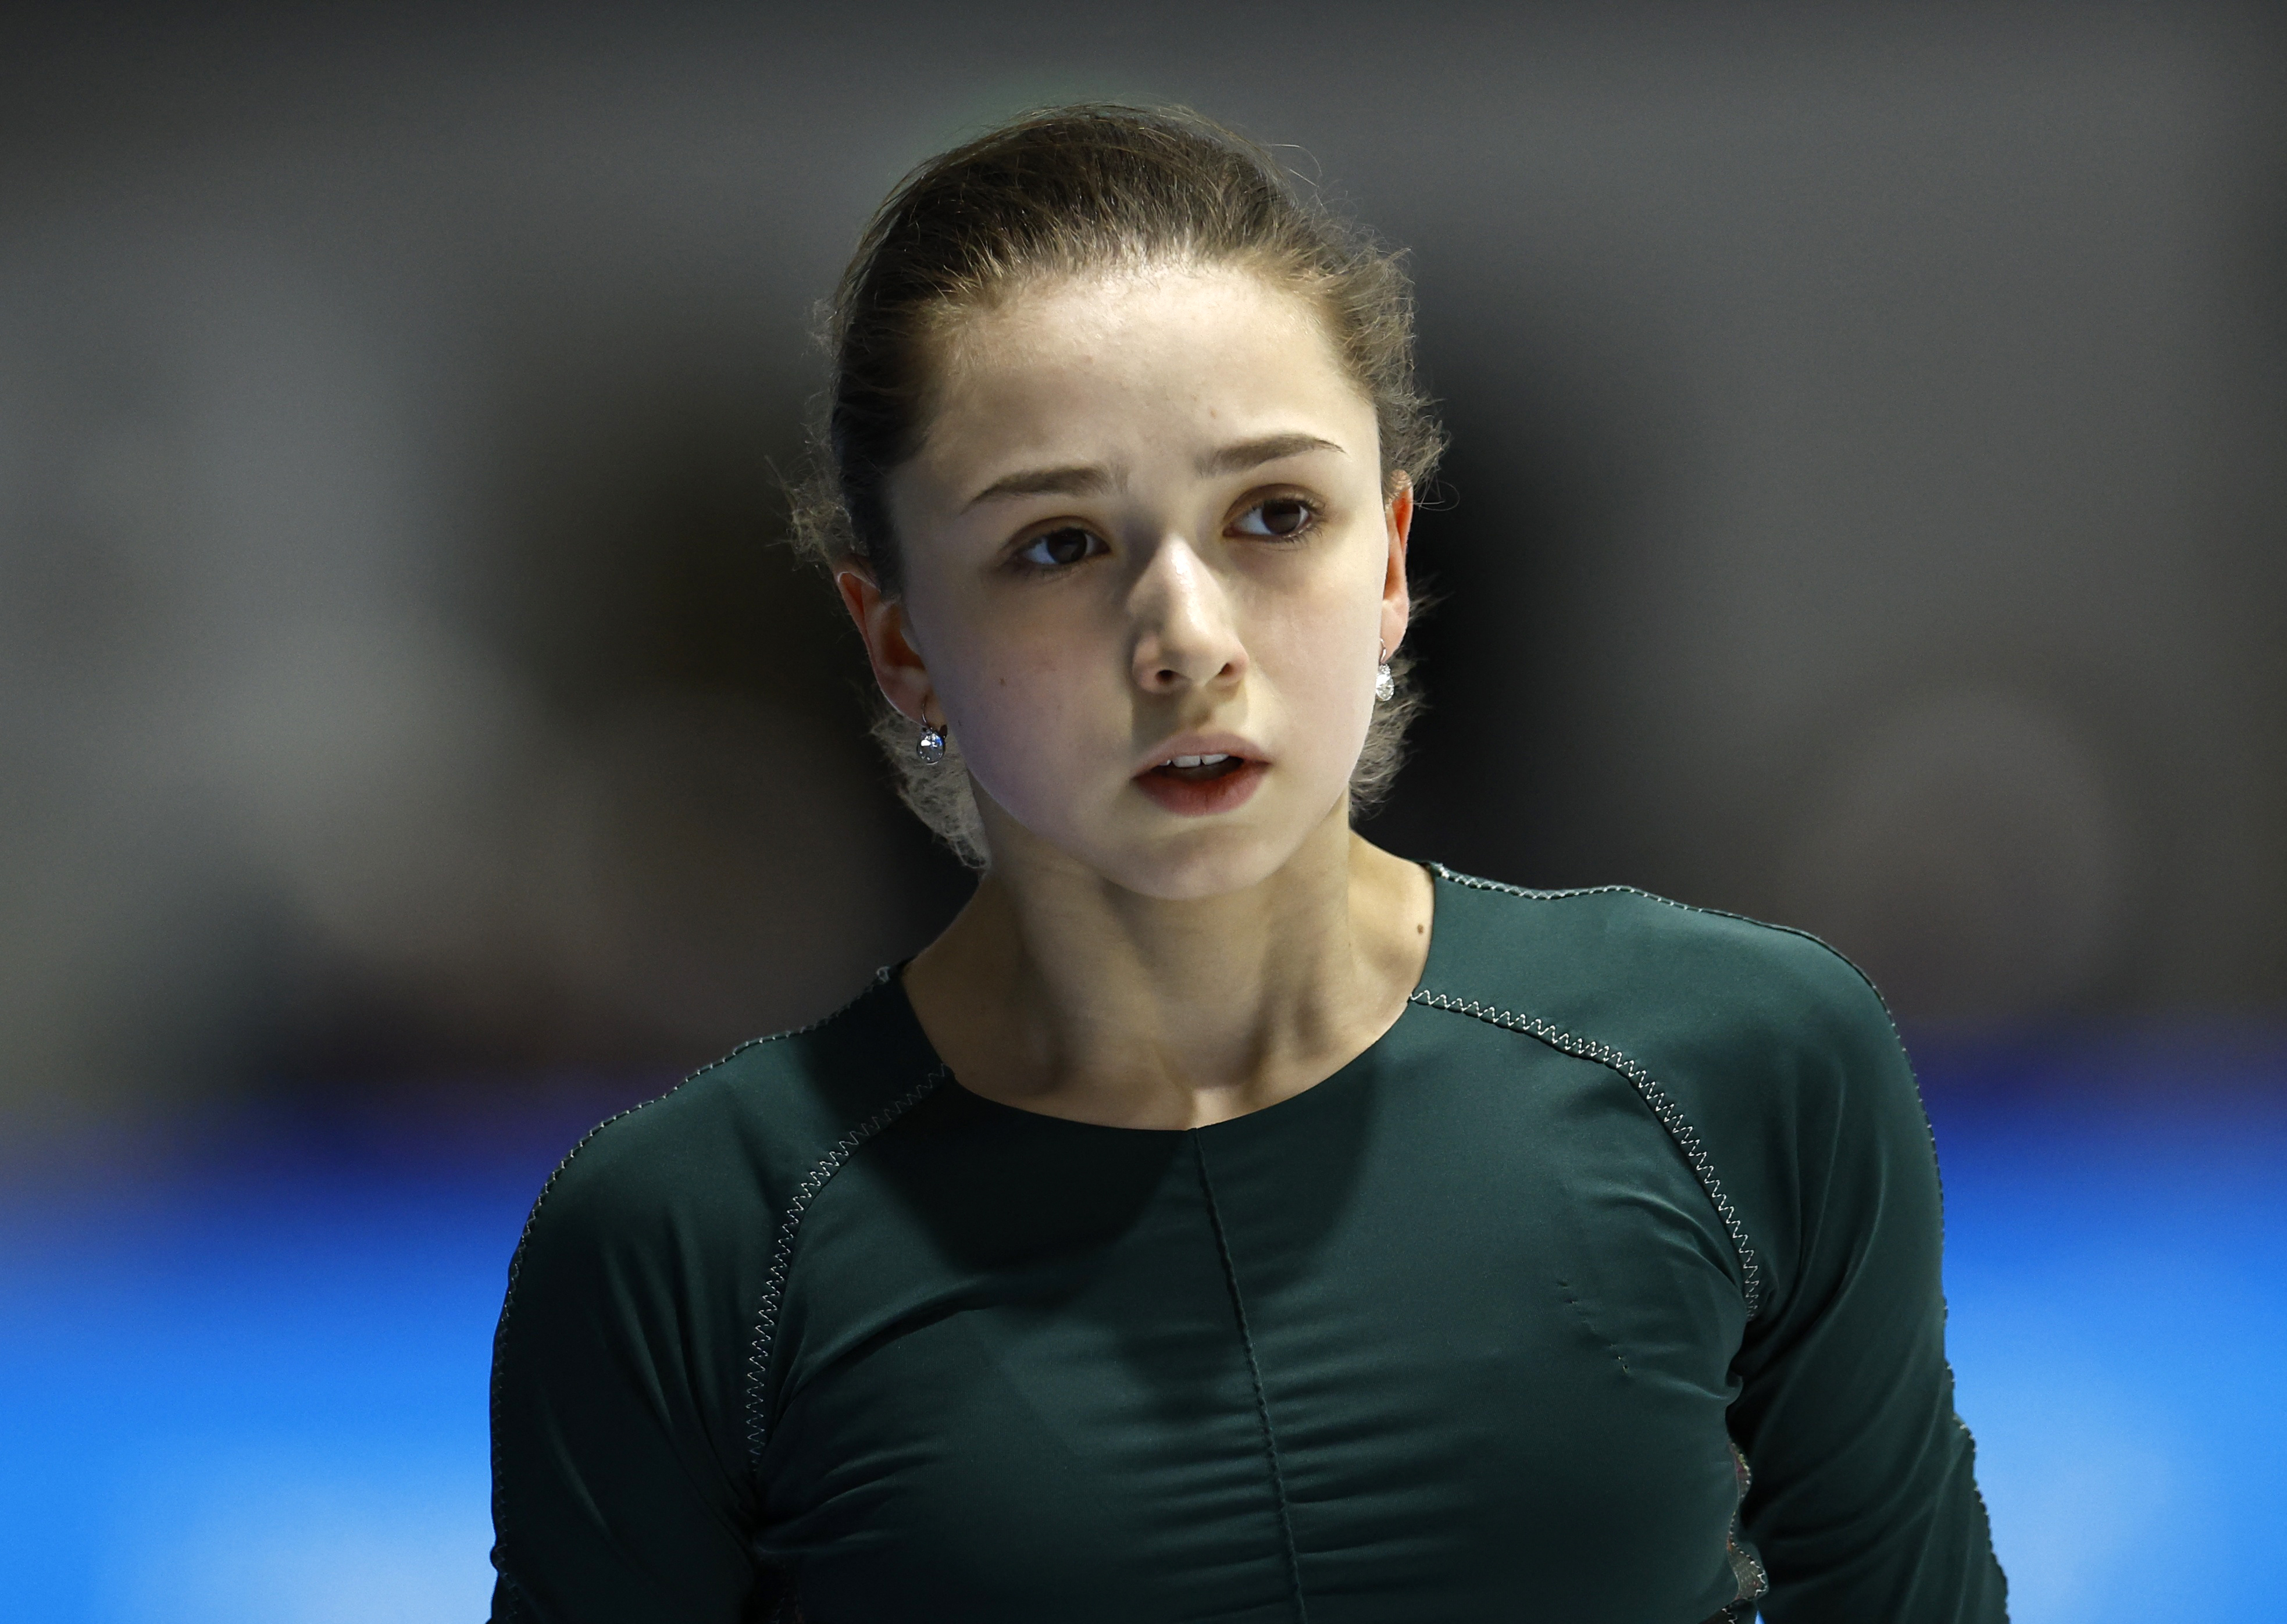 Russia’s Kamila Valieva Cleared to Skate After Doping Hearing, but IOC Will Not Hold Ceremonies If she Wins Medal